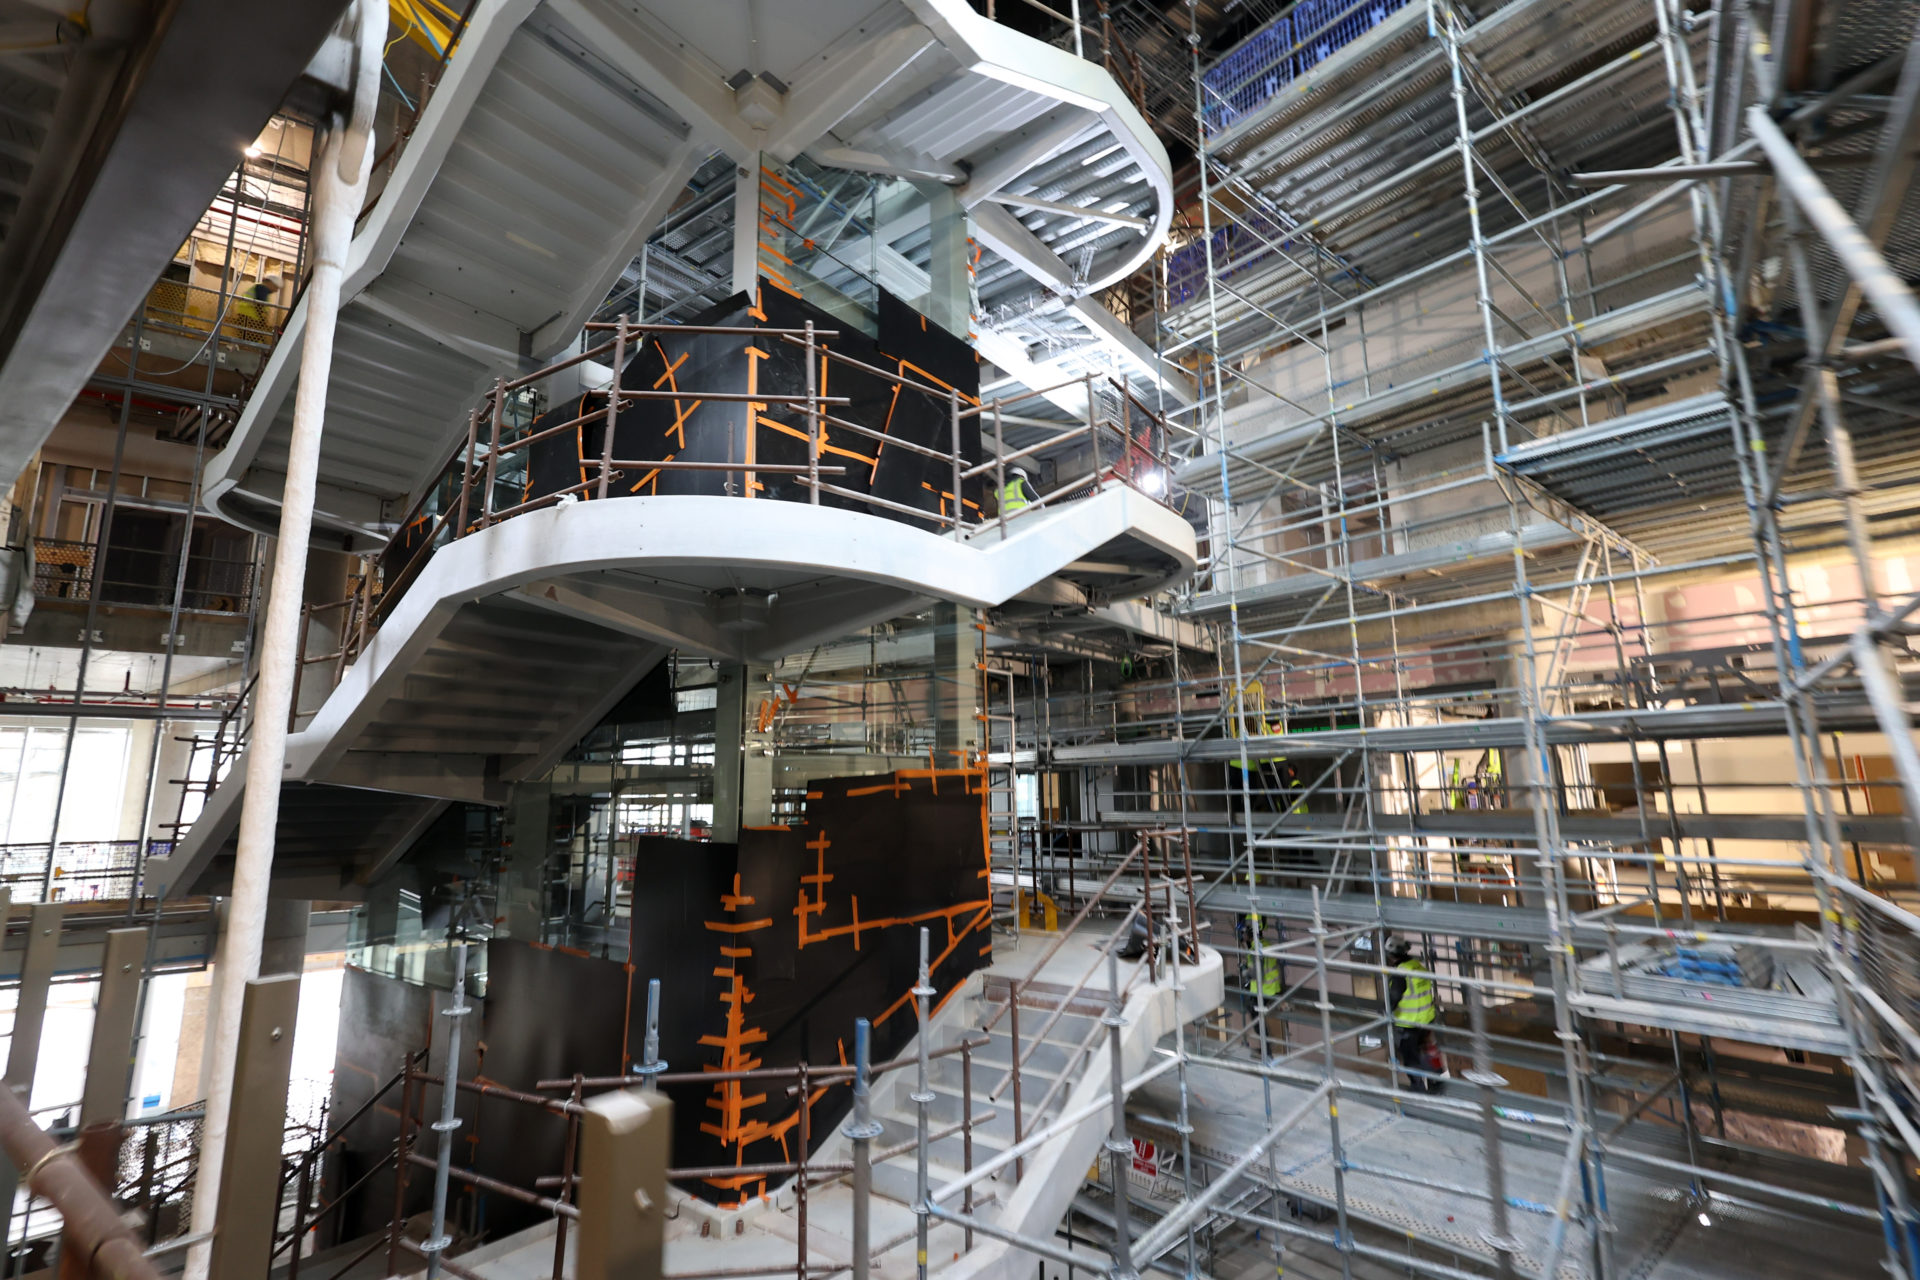 The interior of the new National Children's Hospital under construction at the St James's site in November 2022.